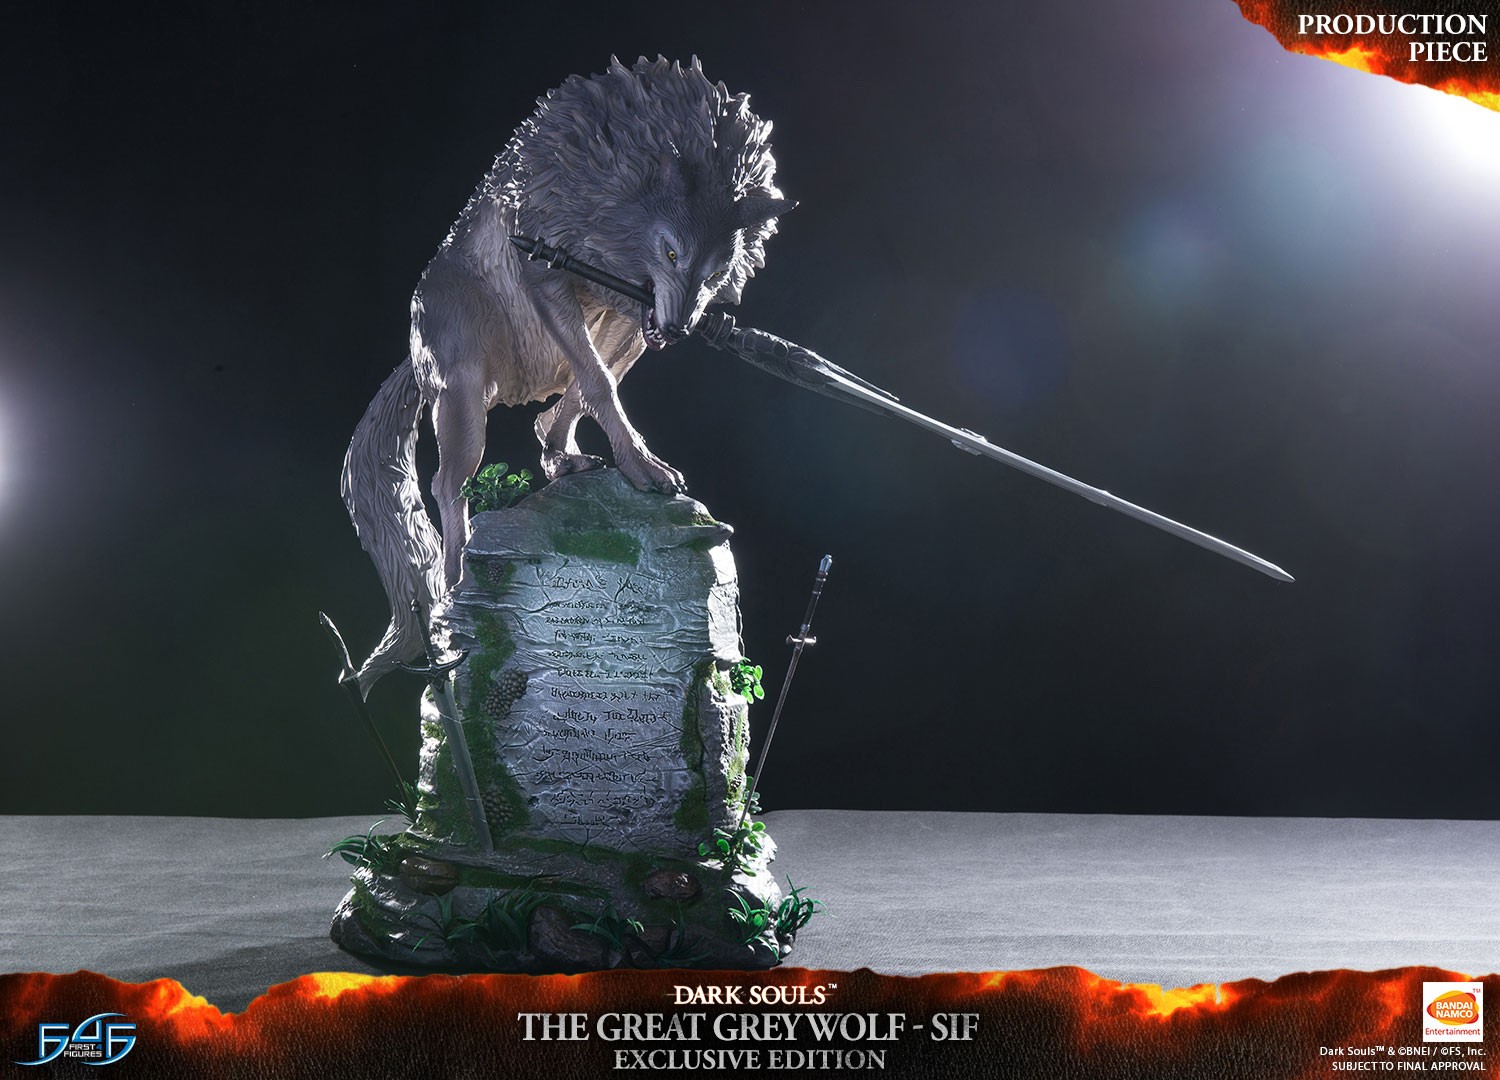 The Great Grey Wolf Sif Exclusive